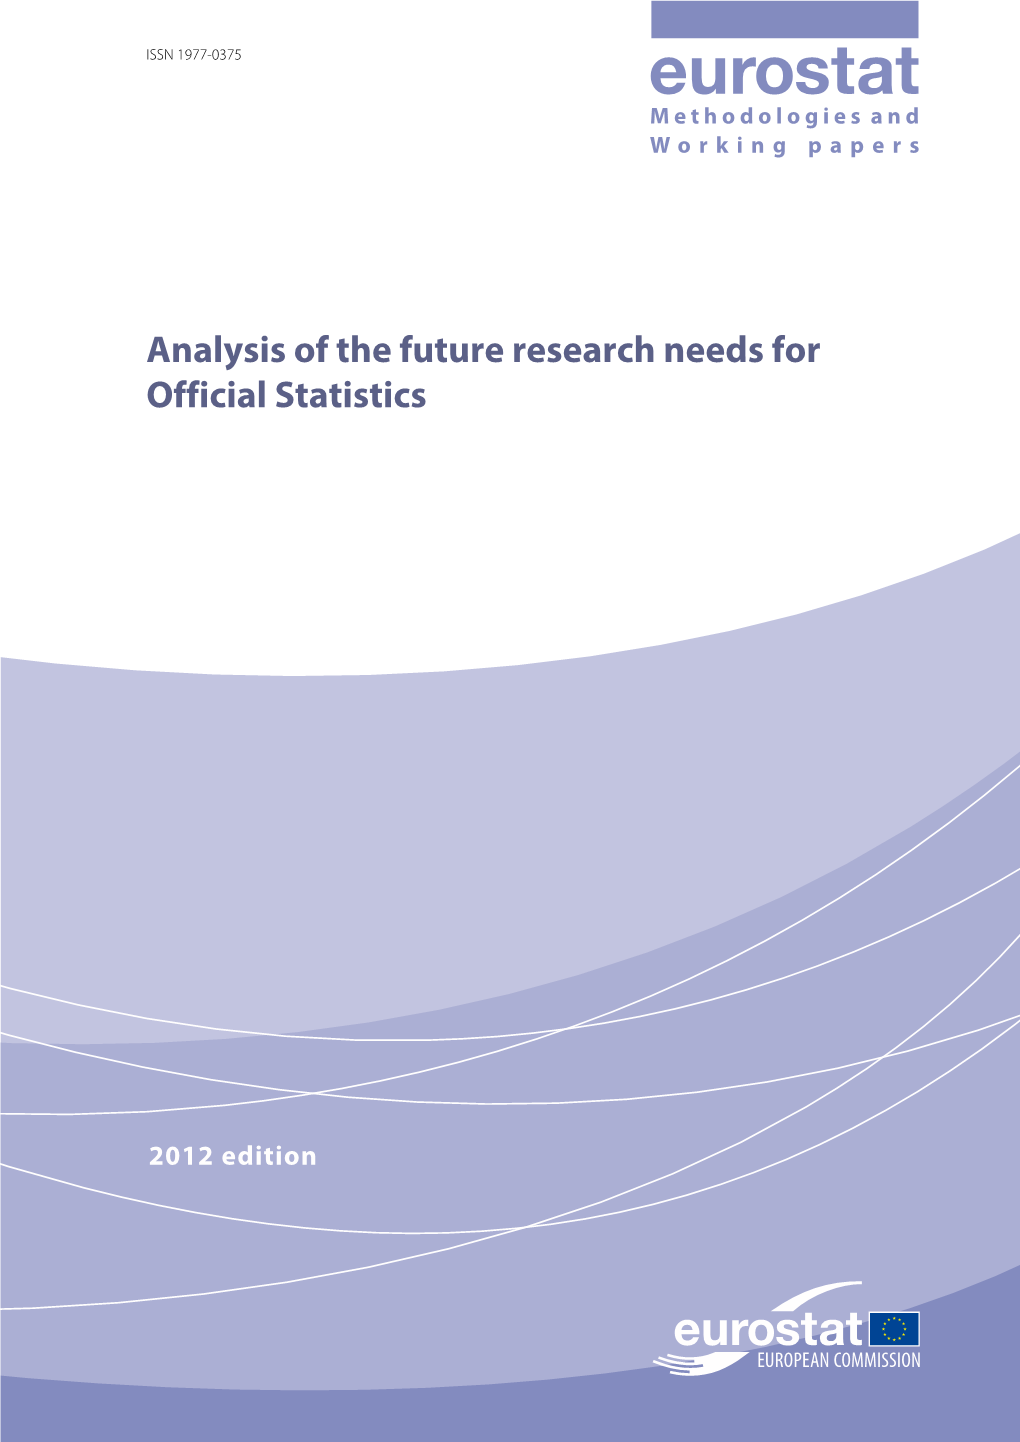 Analysis of the Future Research Needs for Official Statistics